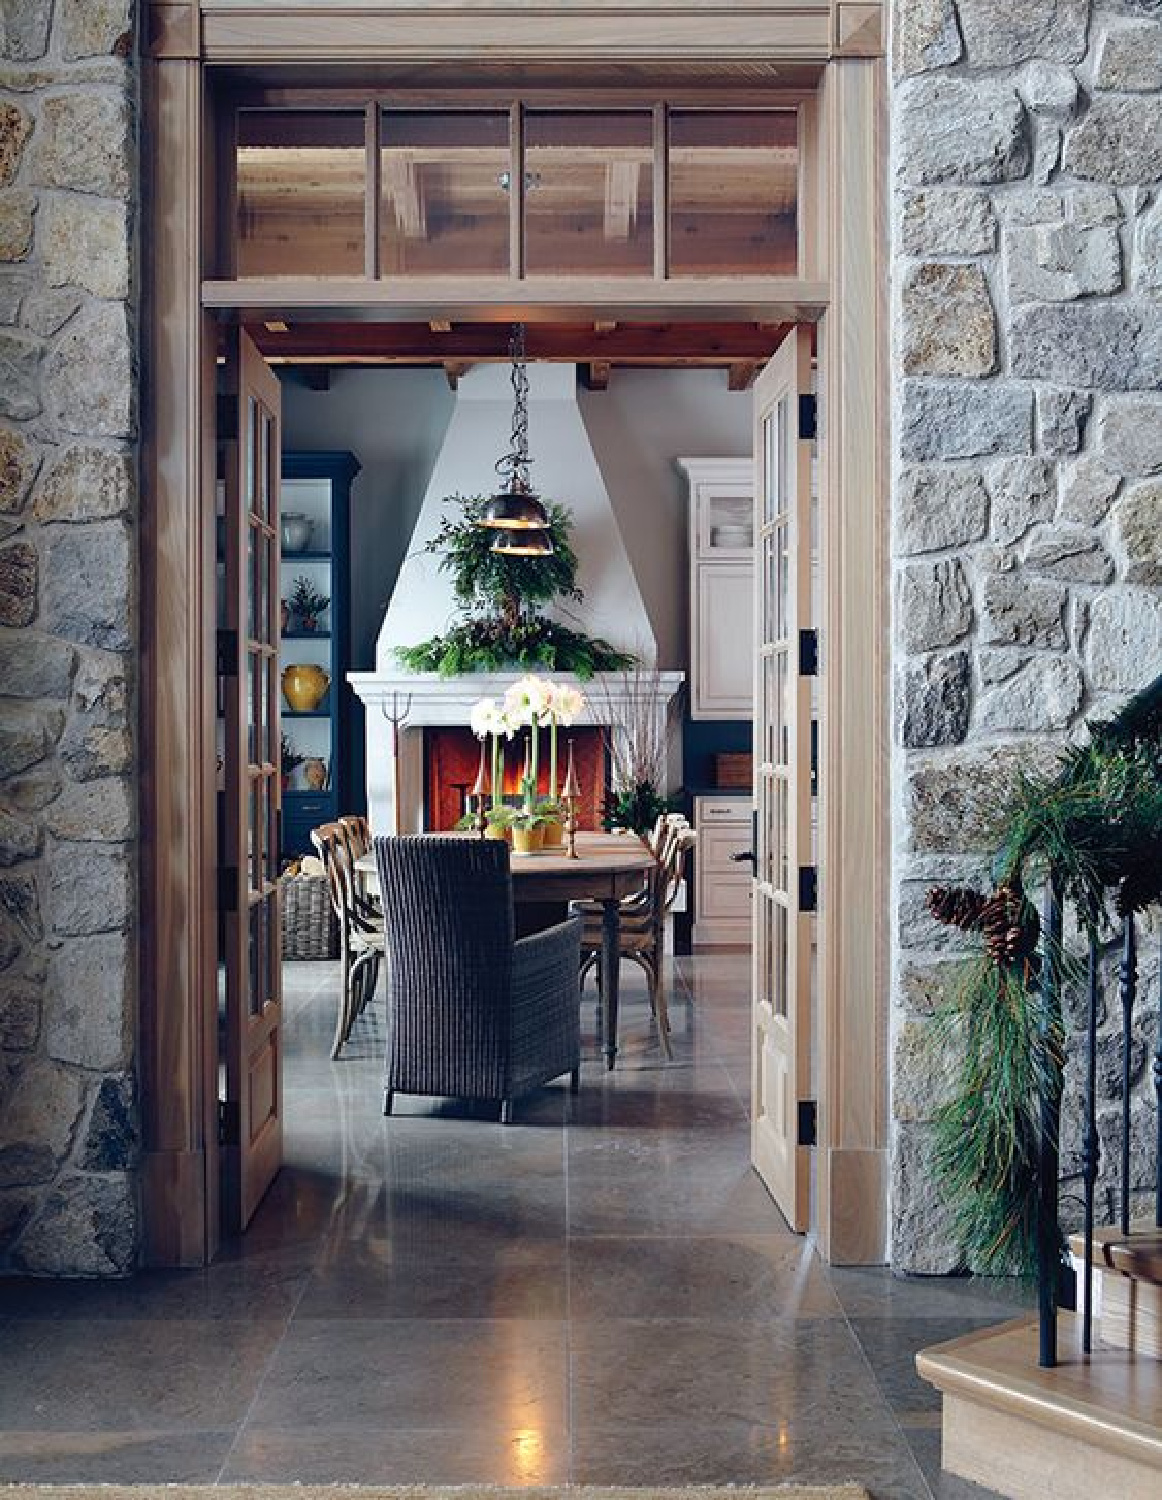 House and Home - mountain rustic cabin holiday Christmas decor with stone walls and stunning architecture.